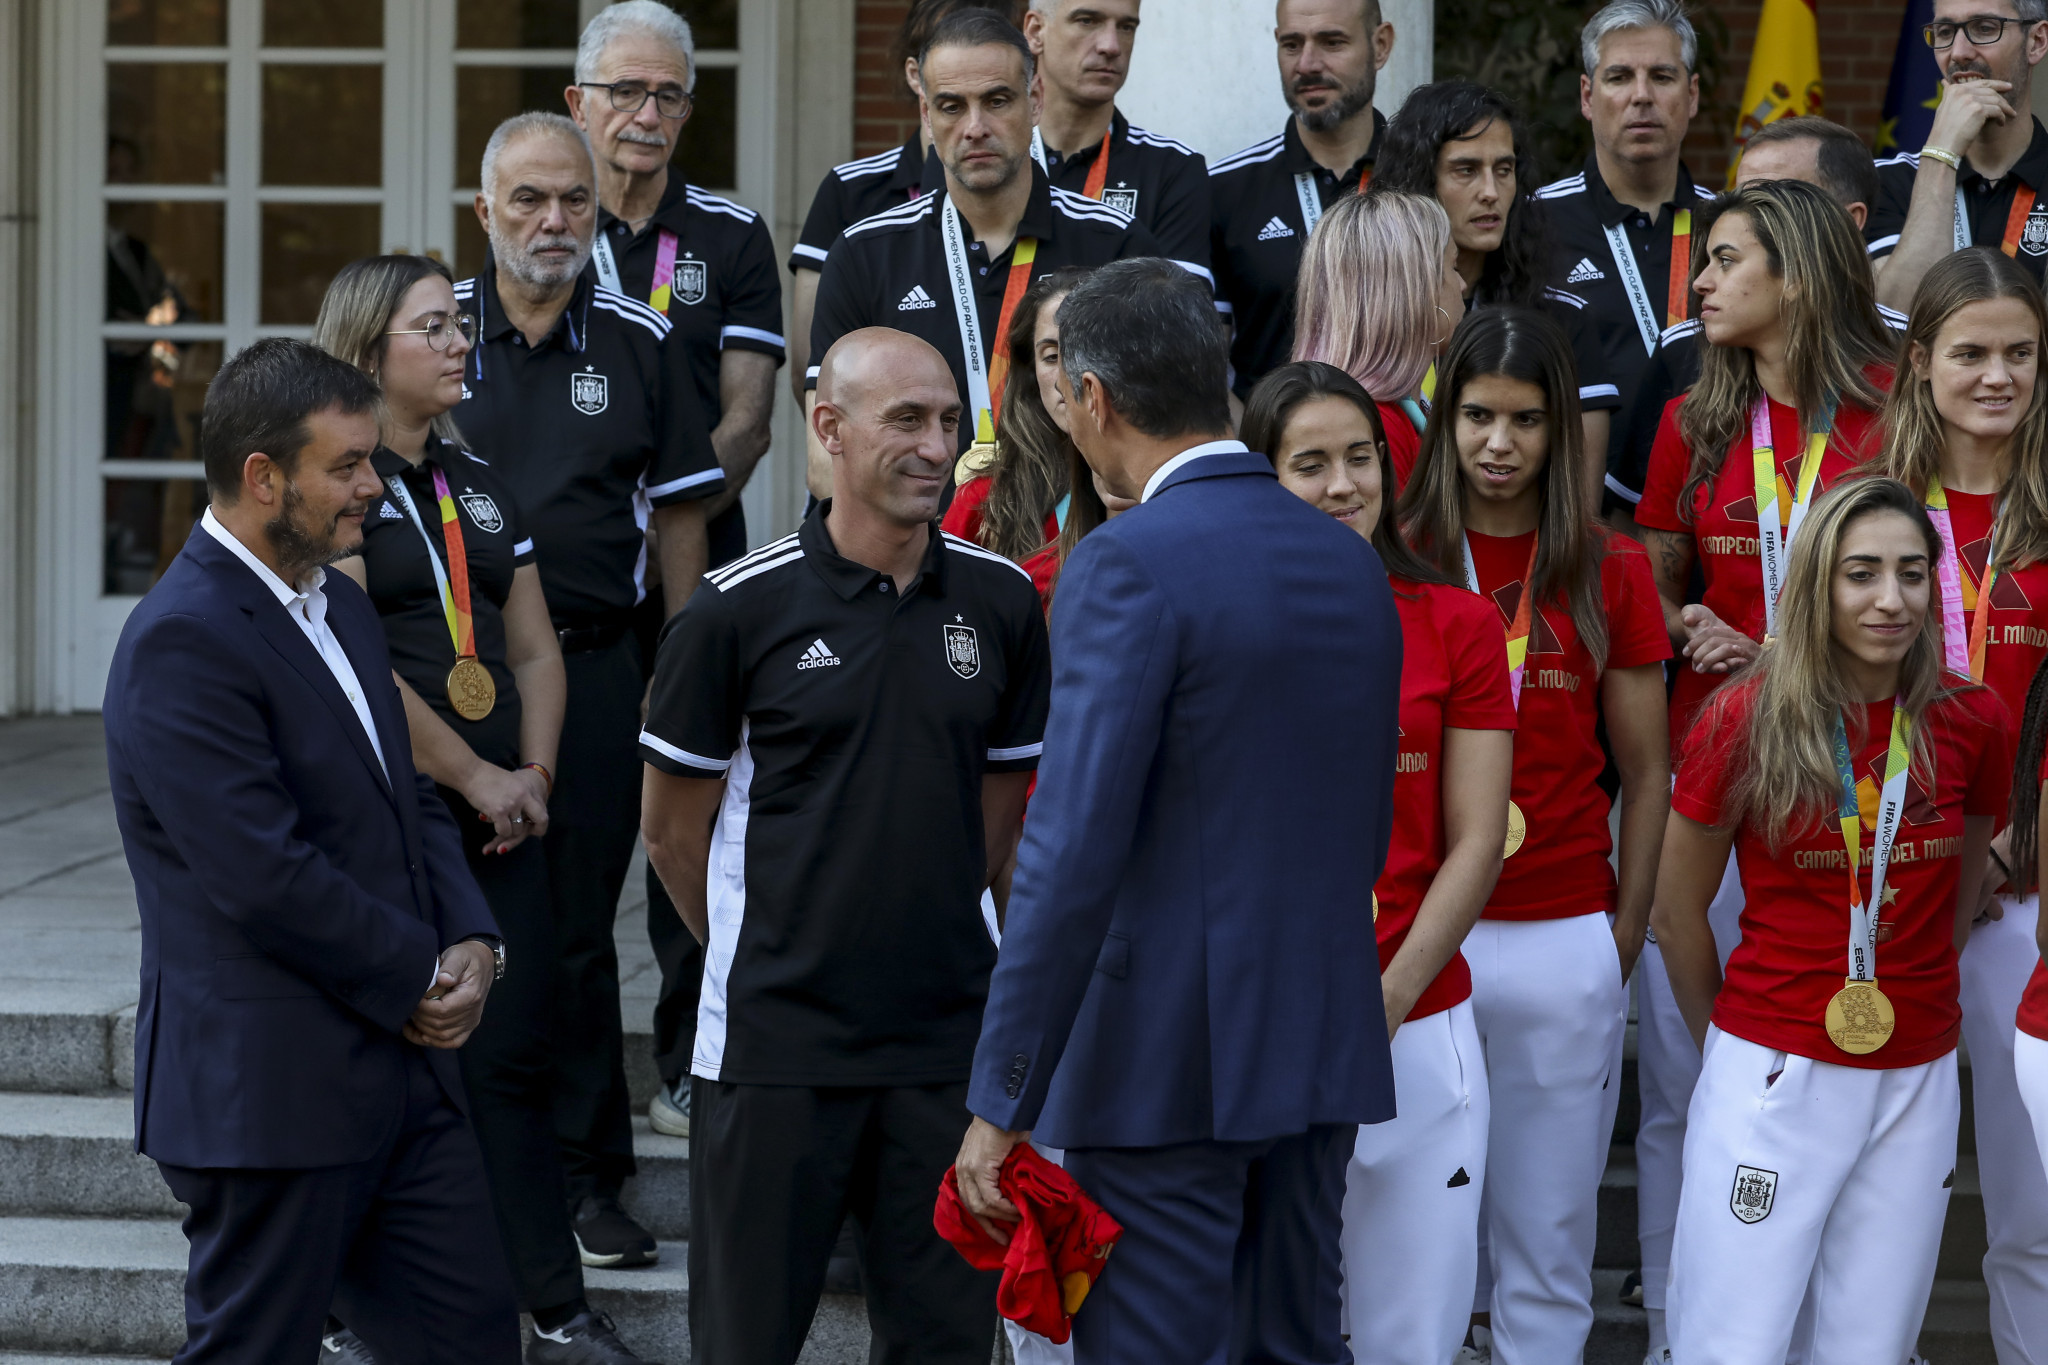 Luis Rubiales talks to Spanish Premier Pedro Sánchez at a reception for the squad in Madrid this week ©Getty Images